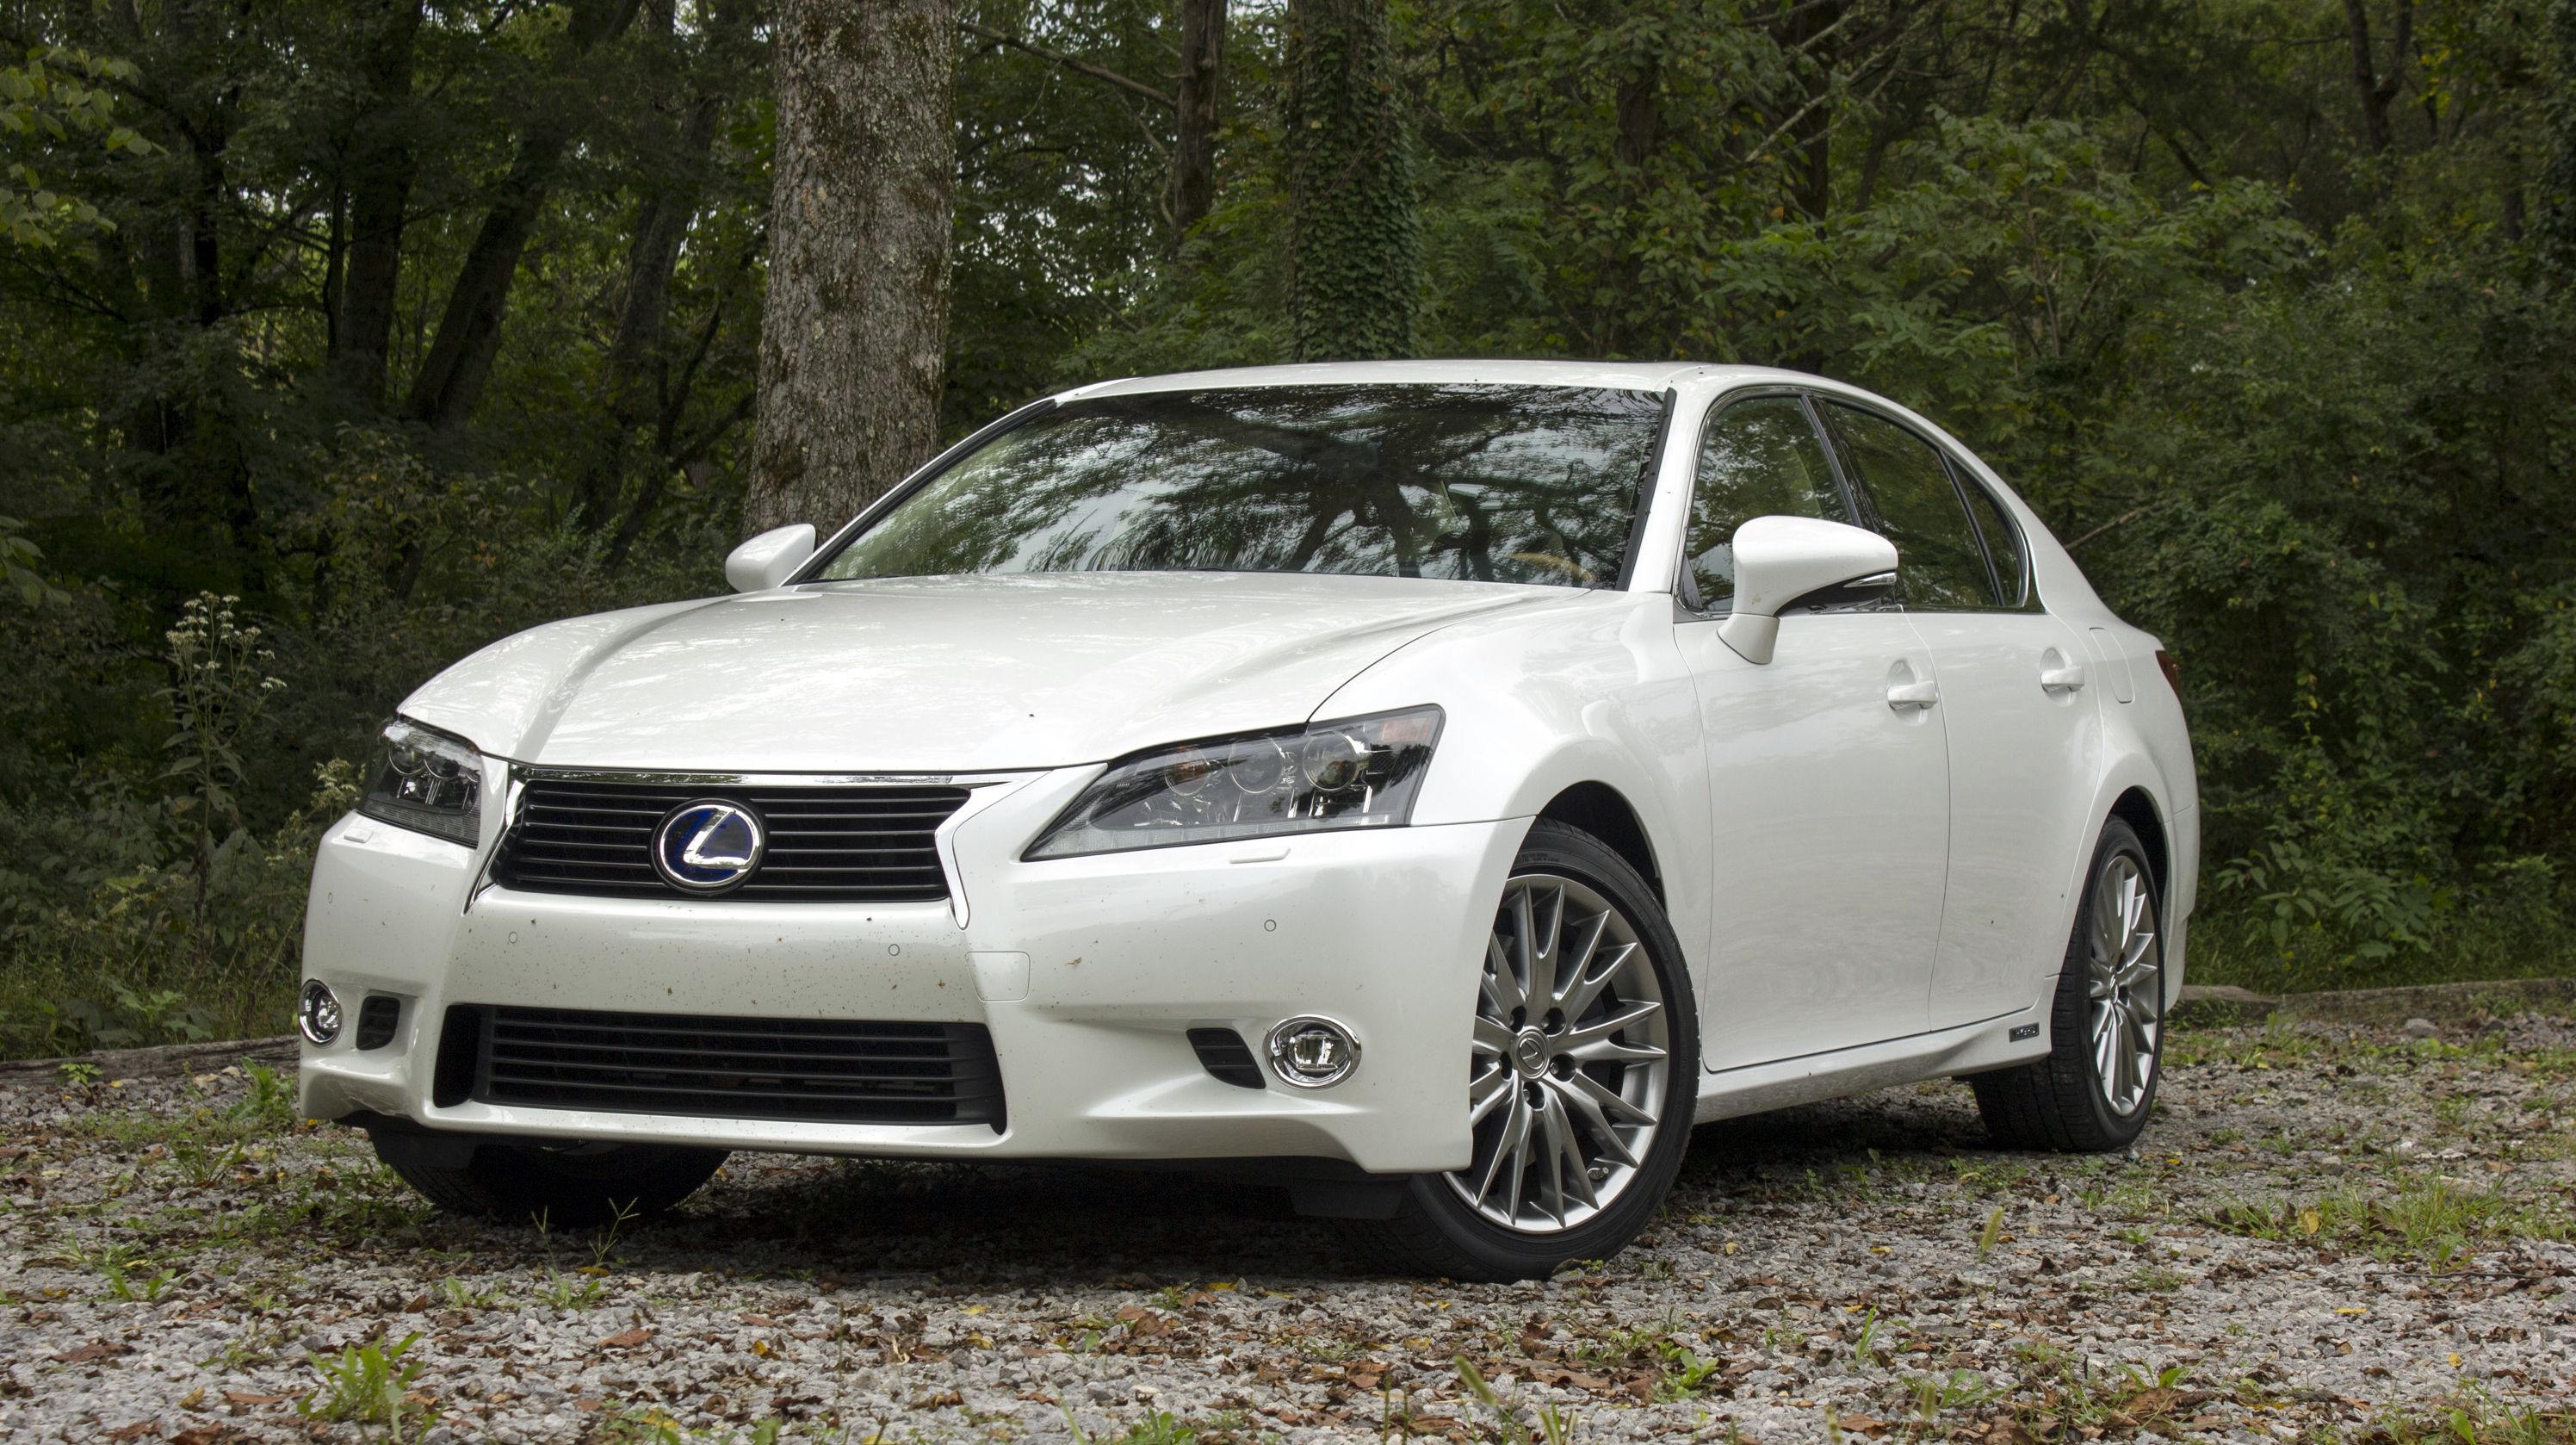  Christian drives the GS450h; will he be disappointed by another Lexus hybrid?